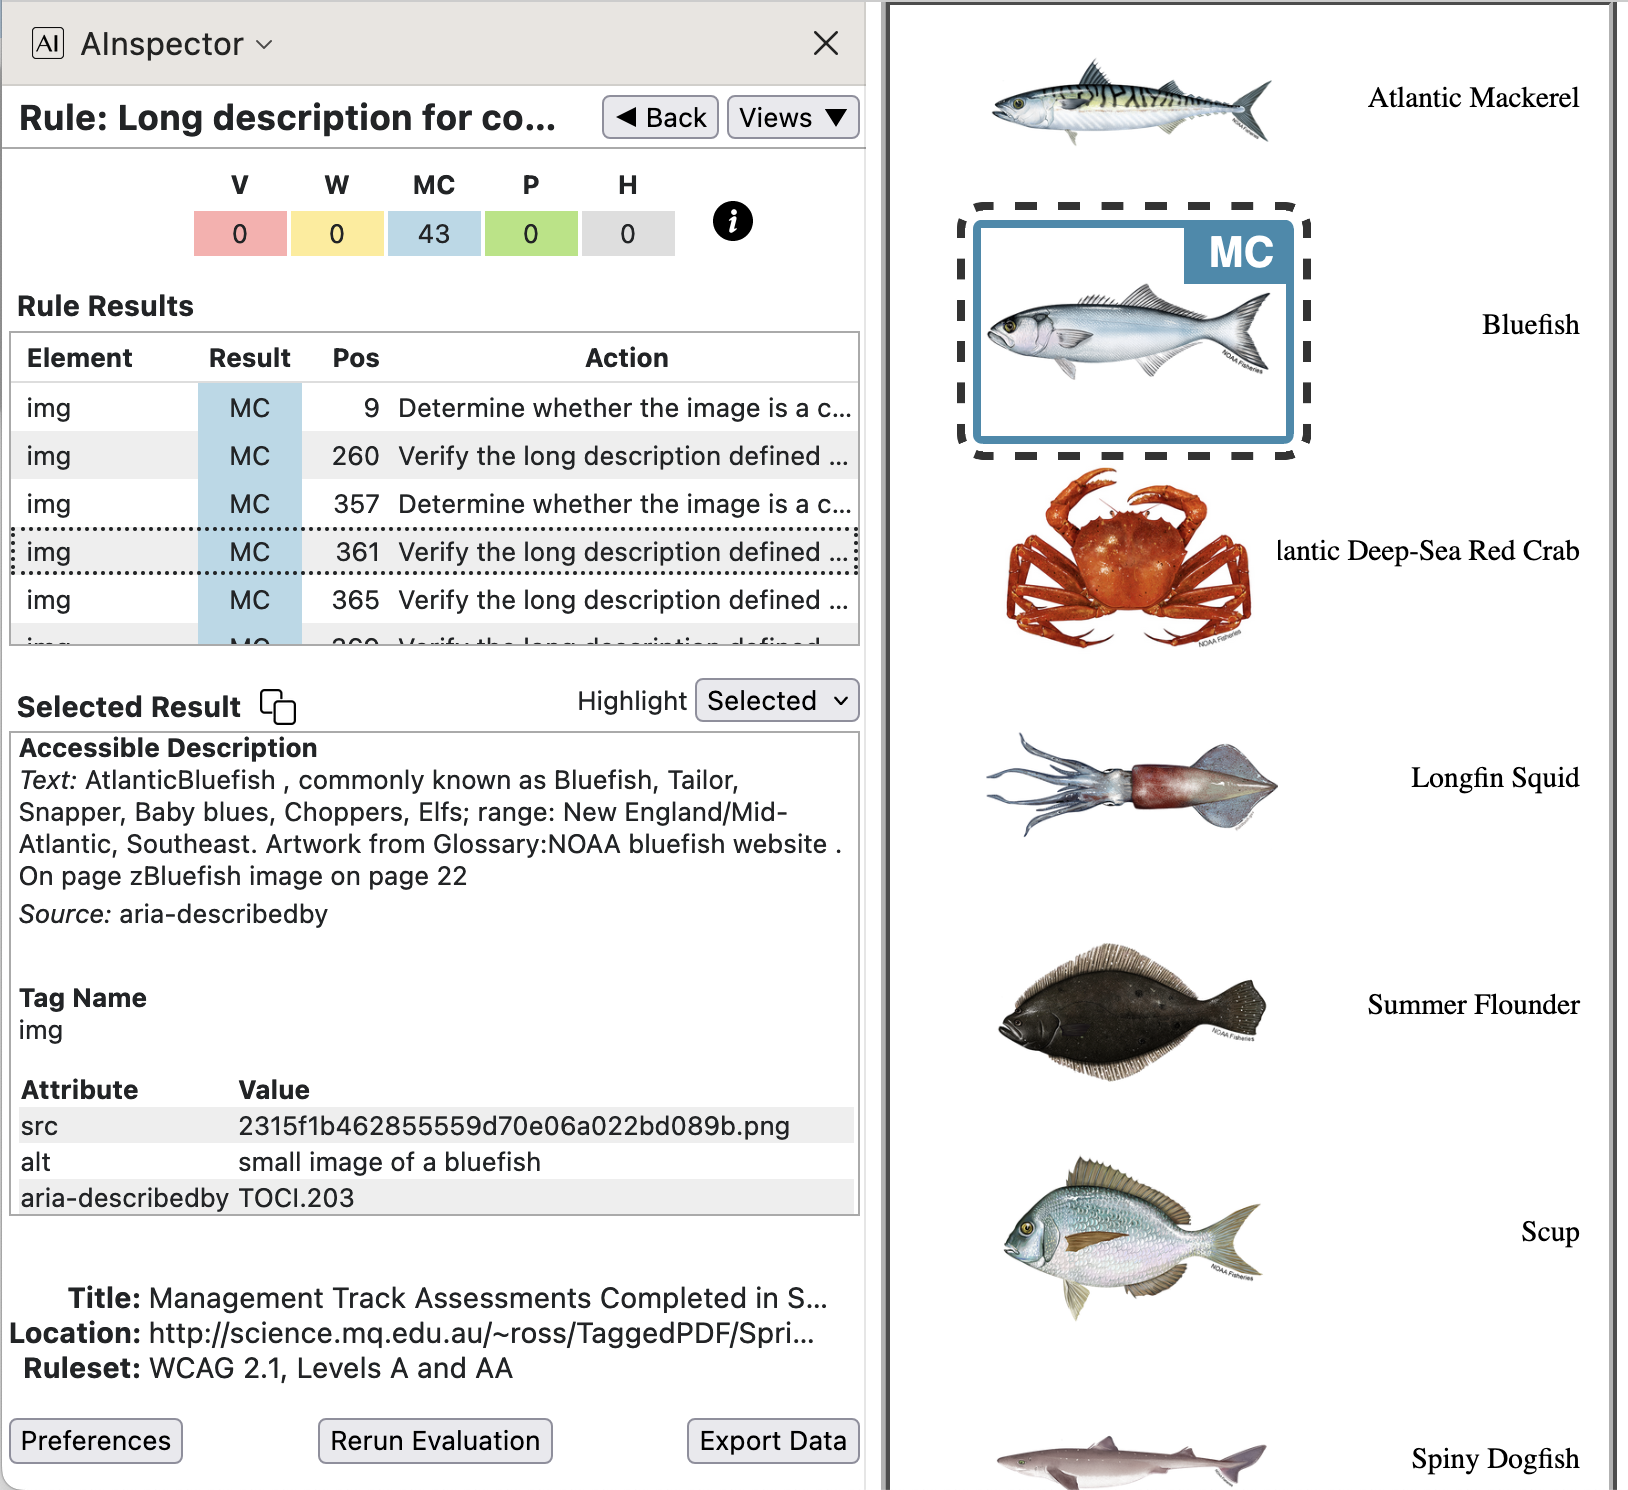 a longdesc is available for the Bluefish image